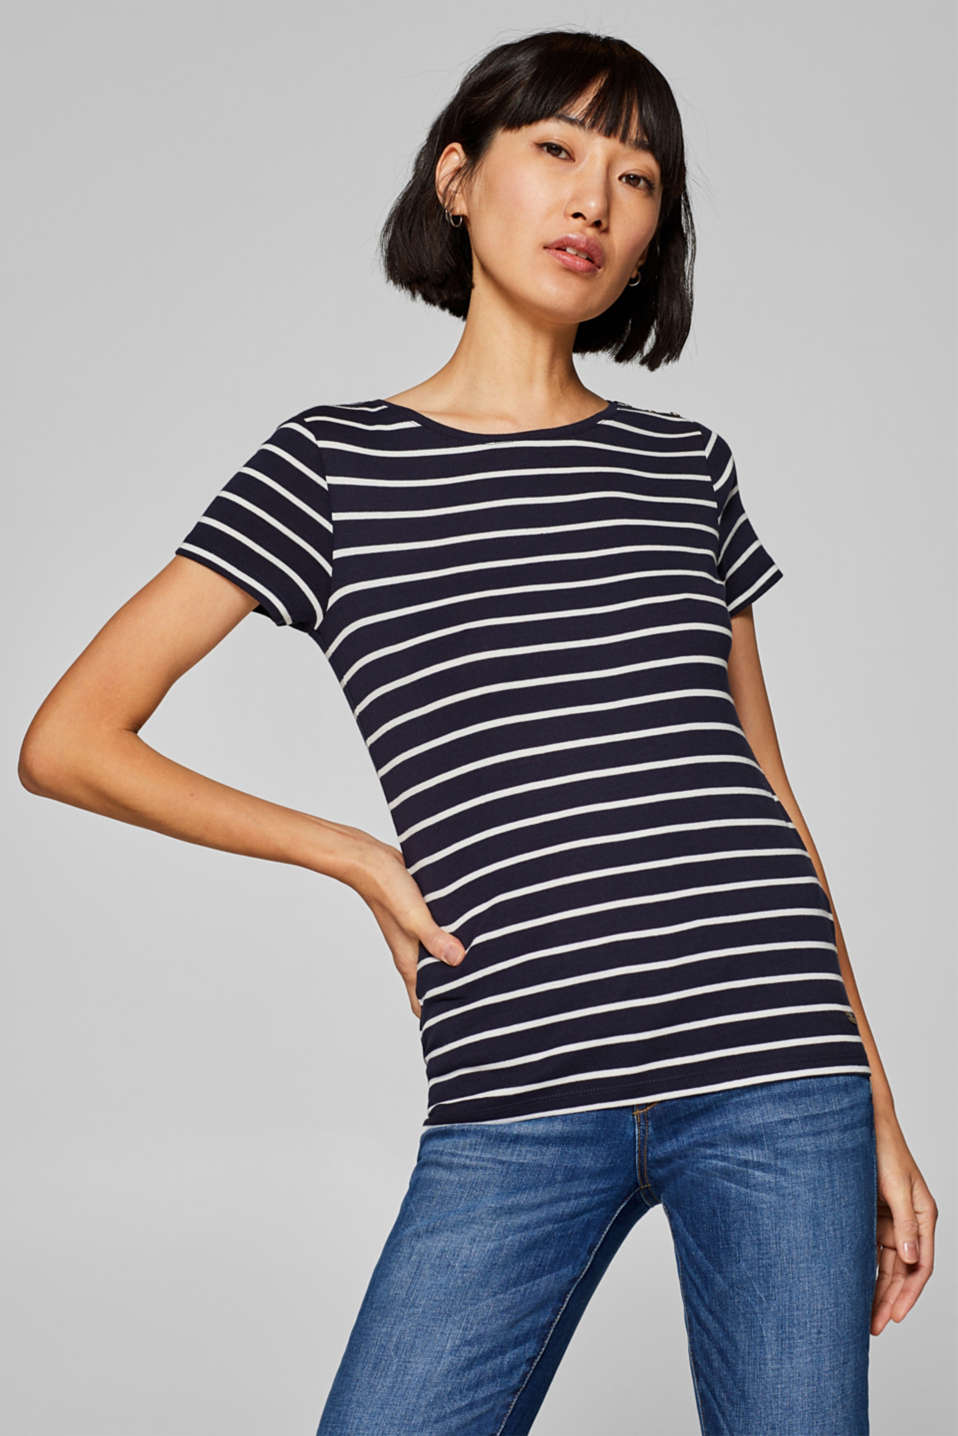 Esprit - Striped top with organic cotton, 100% cotton at our Online Shop